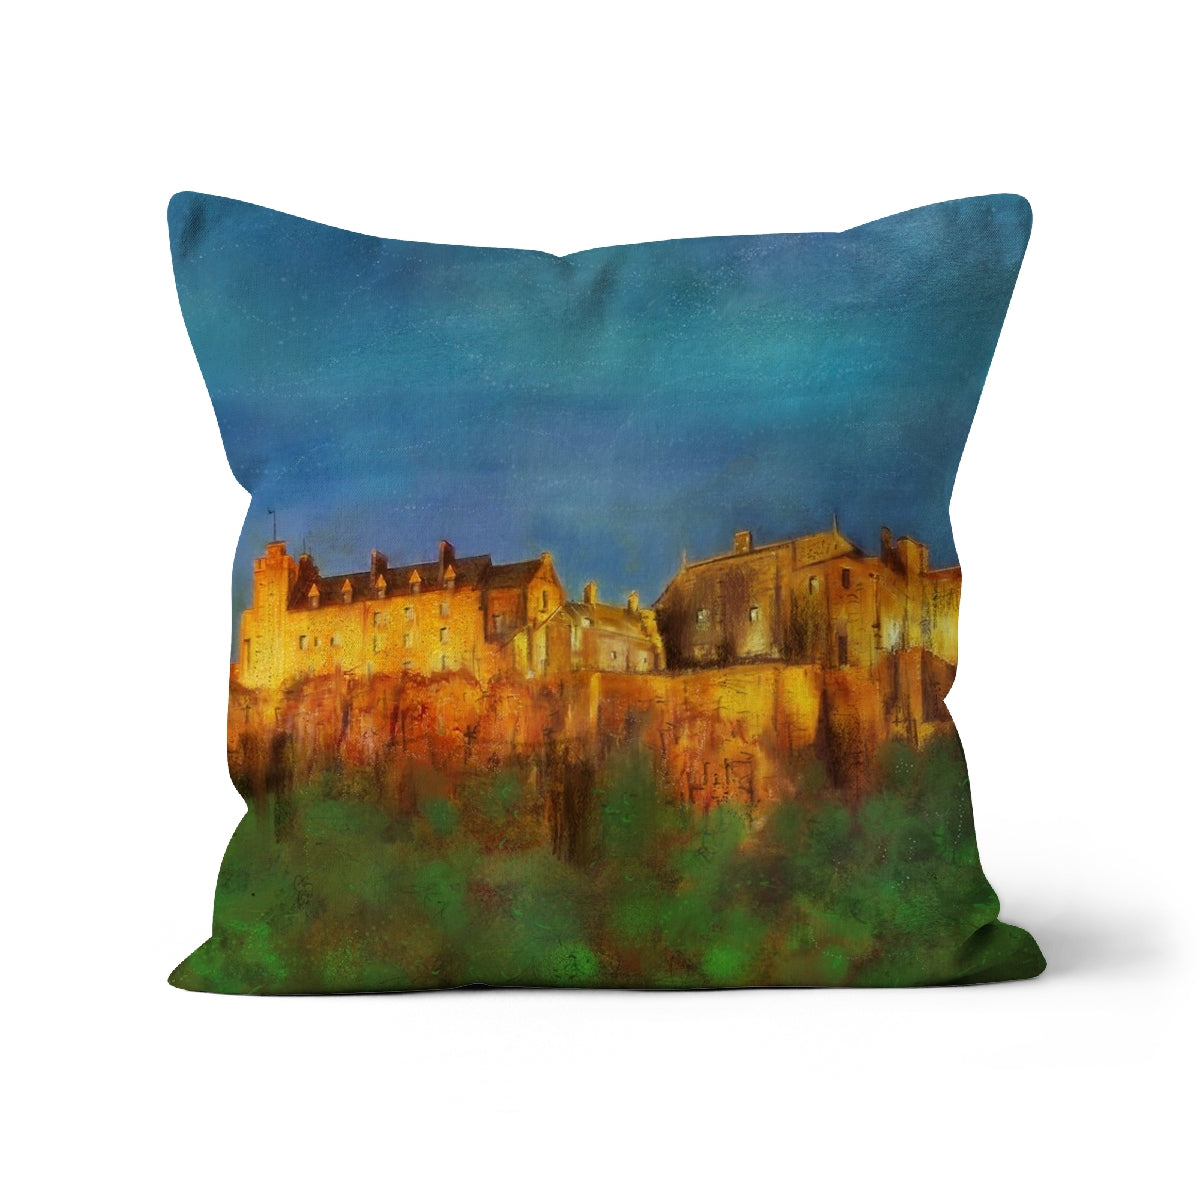 Stirling Castle Art Gifts Cushion-Cushions-Historic & Iconic Scotland Art Gallery-Faux Suede-24"x24"-Paintings, Prints, Homeware, Art Gifts From Scotland By Scottish Artist Kevin Hunter